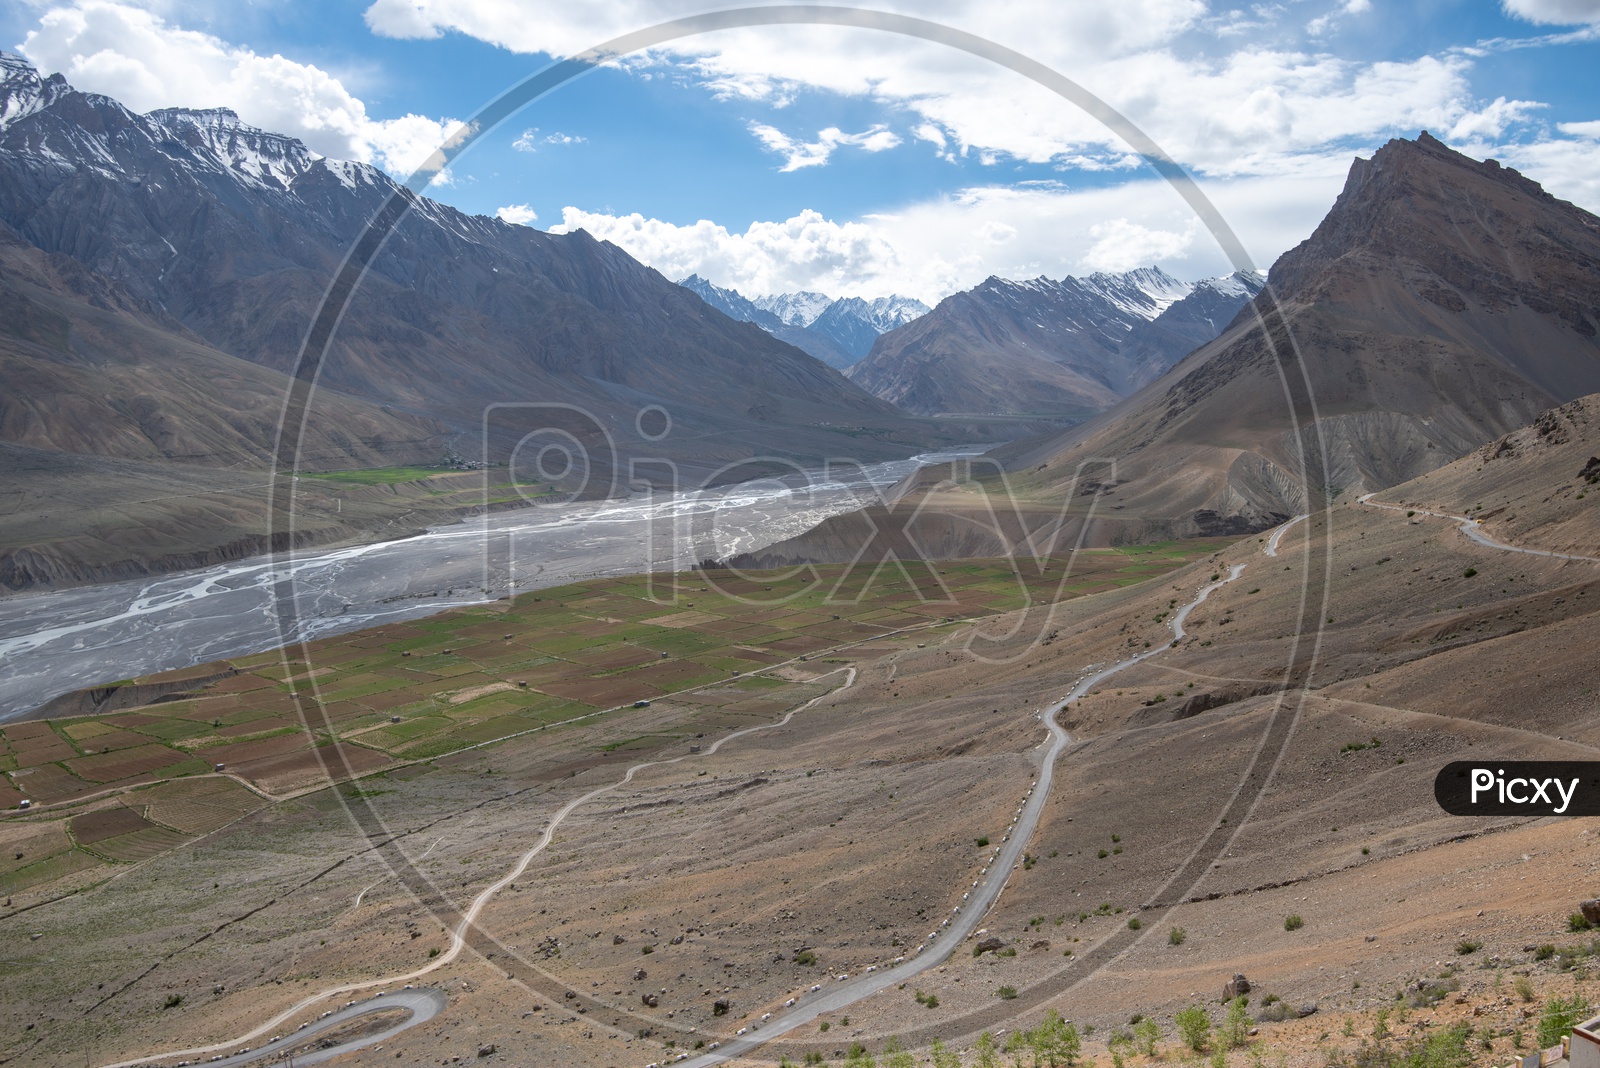 Snow capped Mountains of Spiti Valley